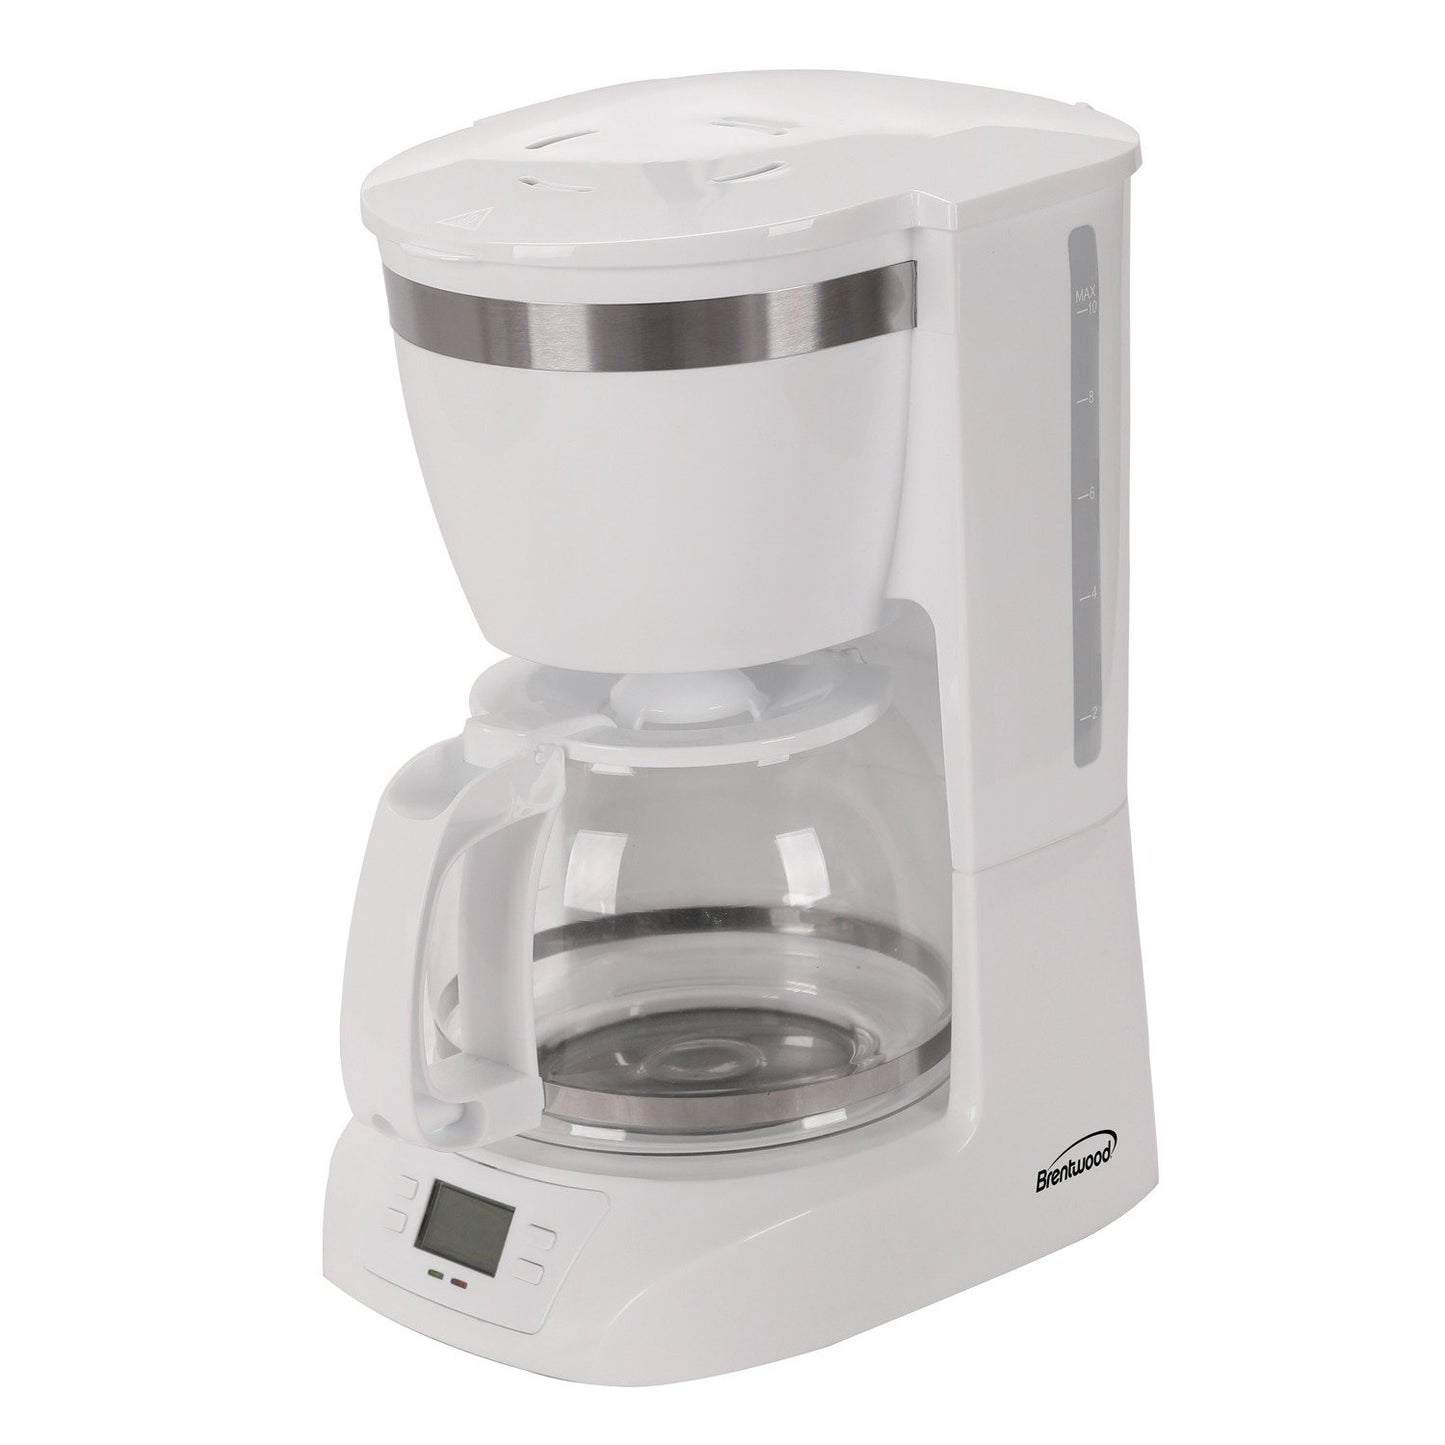 Brentwood Appl. TS-219W 10-Cup Digital Coffee Maker (White)